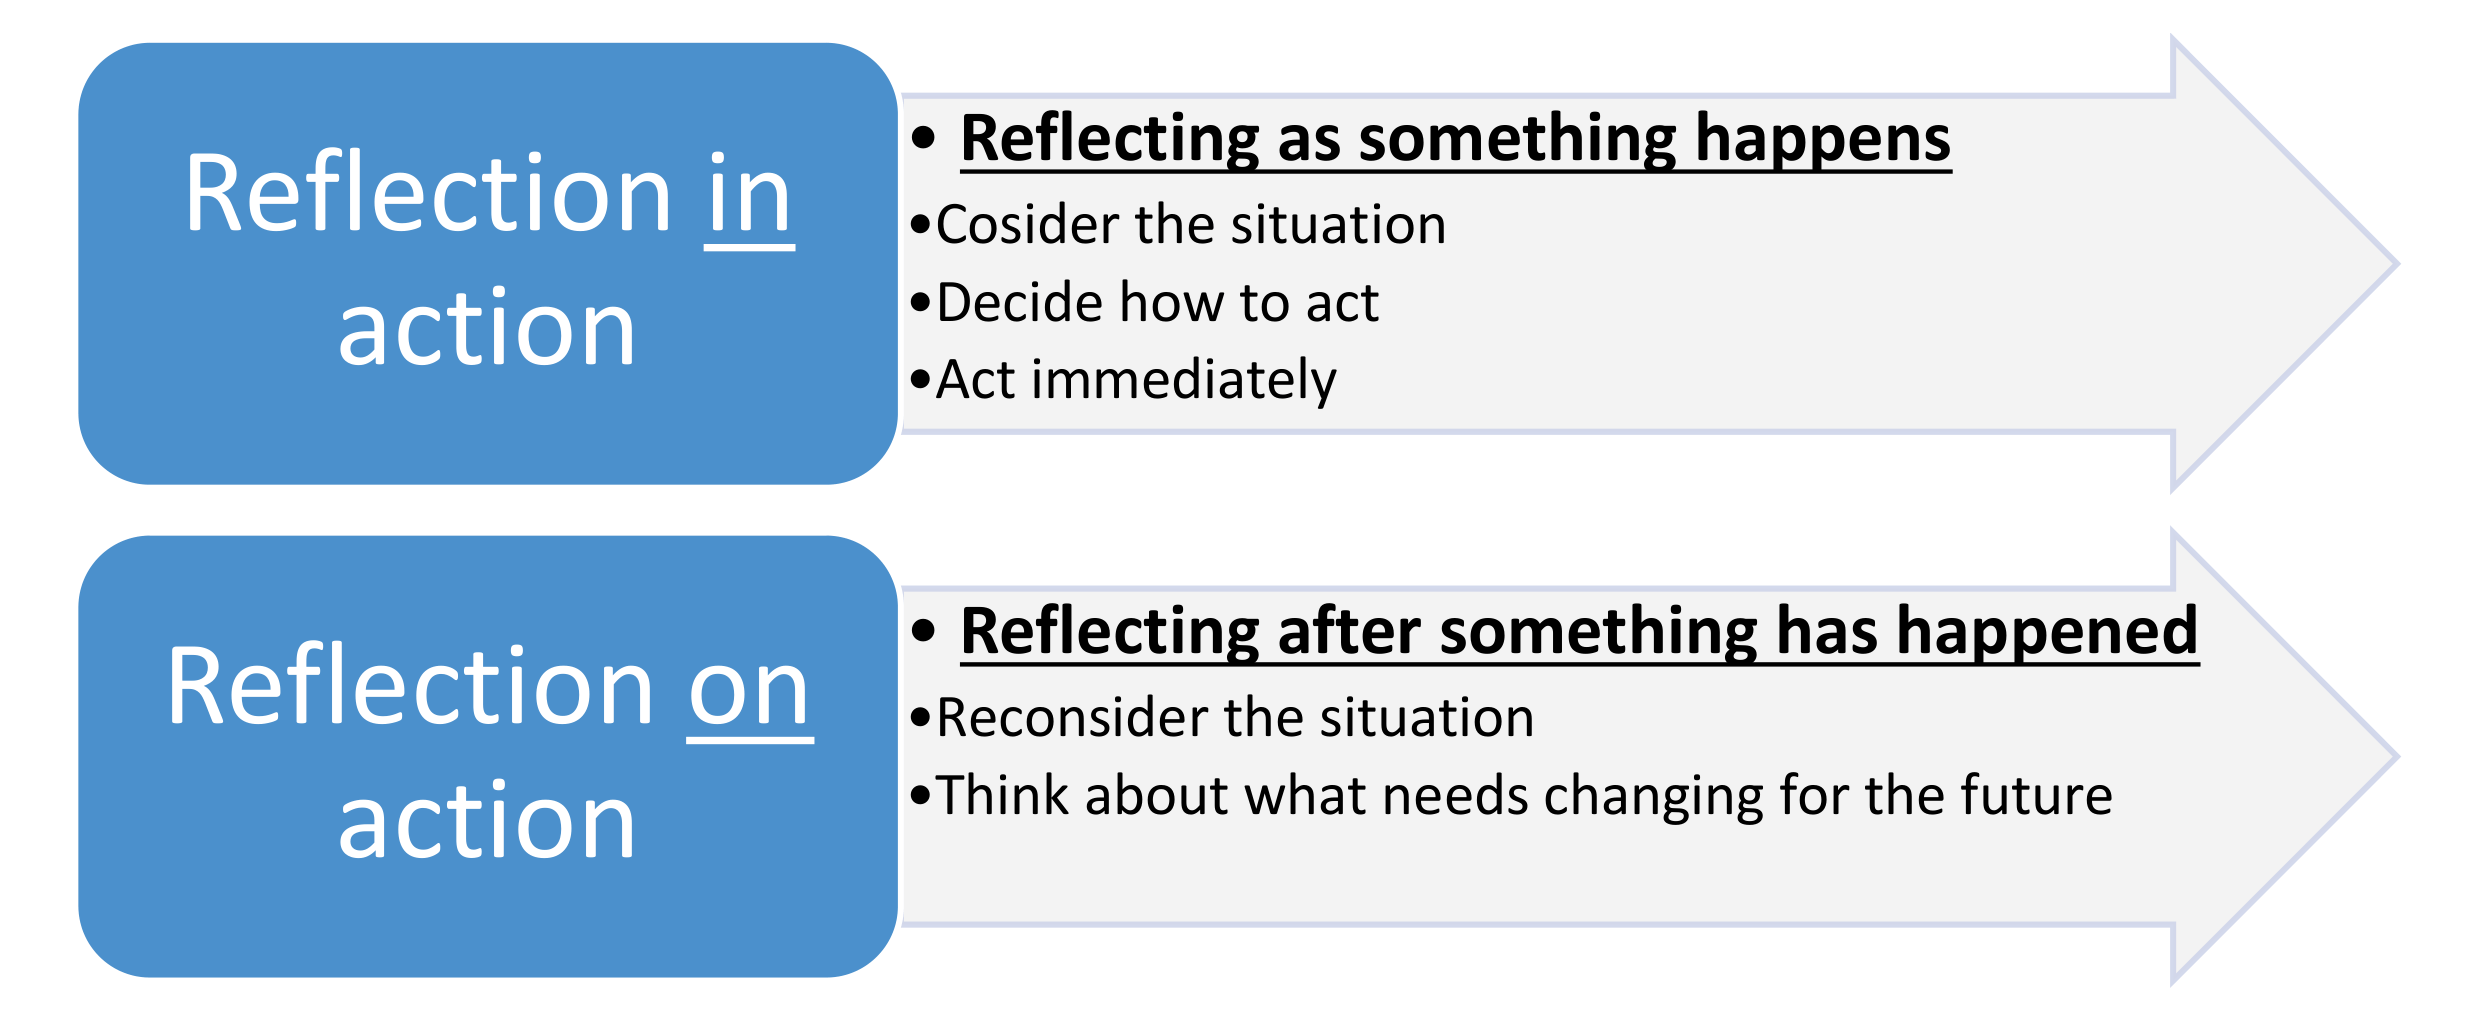 Reflection In Action and On Action